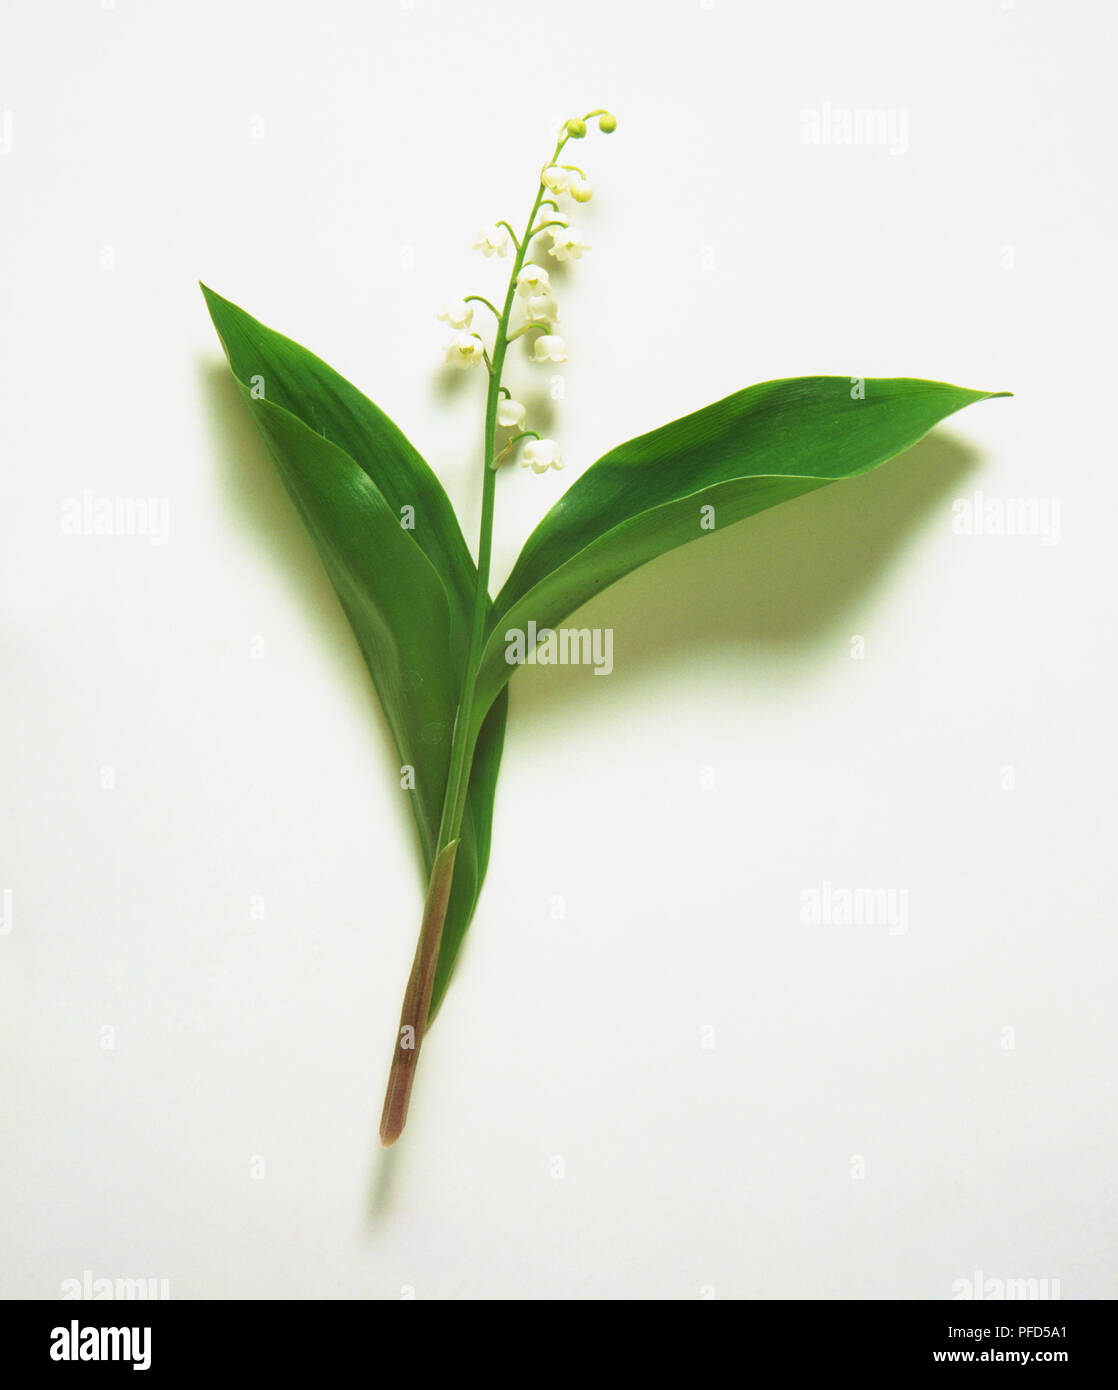 Convallaria majalis, Lily of the Valley, showing bell-shaped white flowers and large green leaves Stock Photo